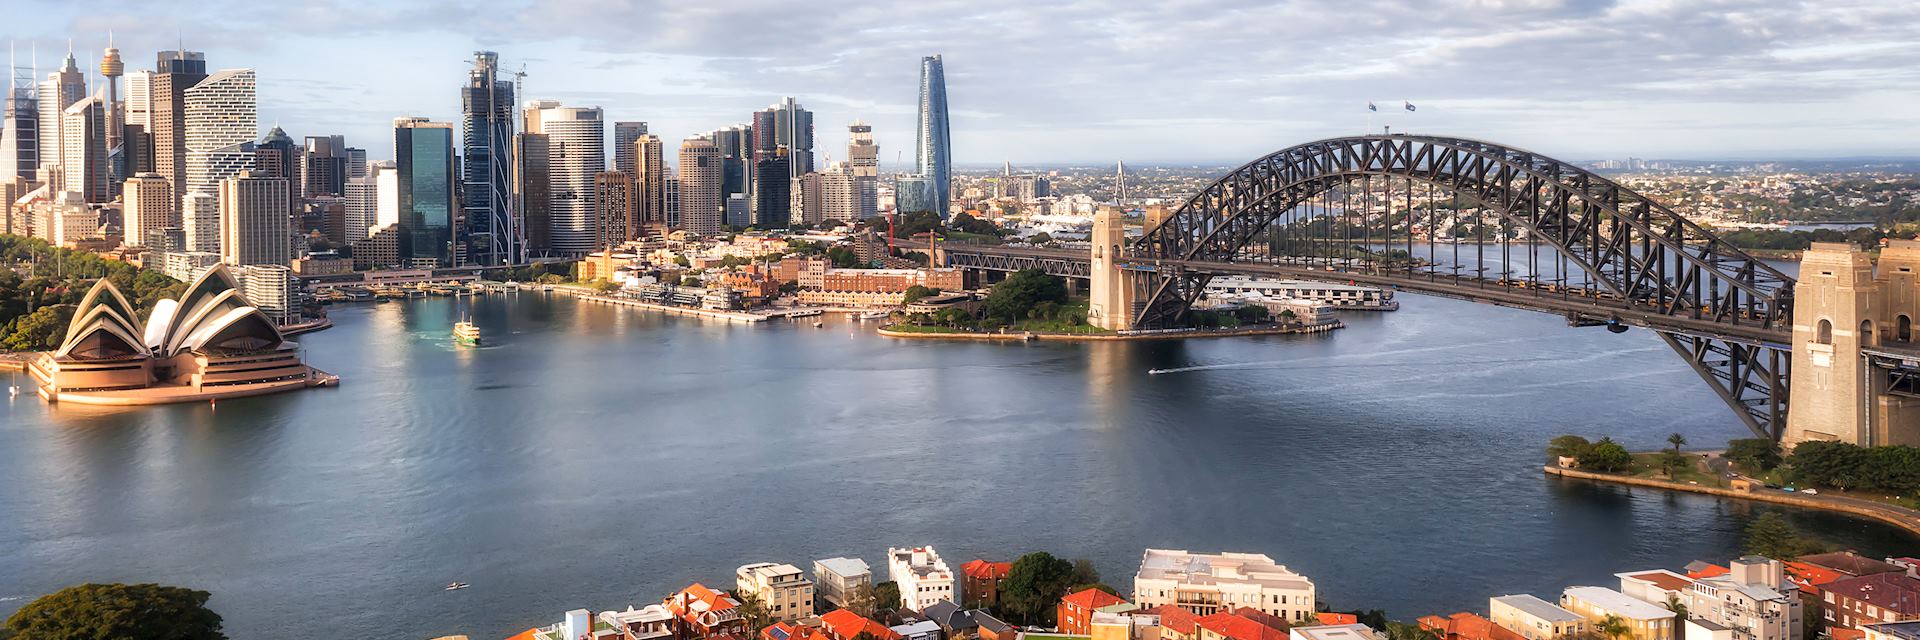 Sydney Harbour, New South Wales